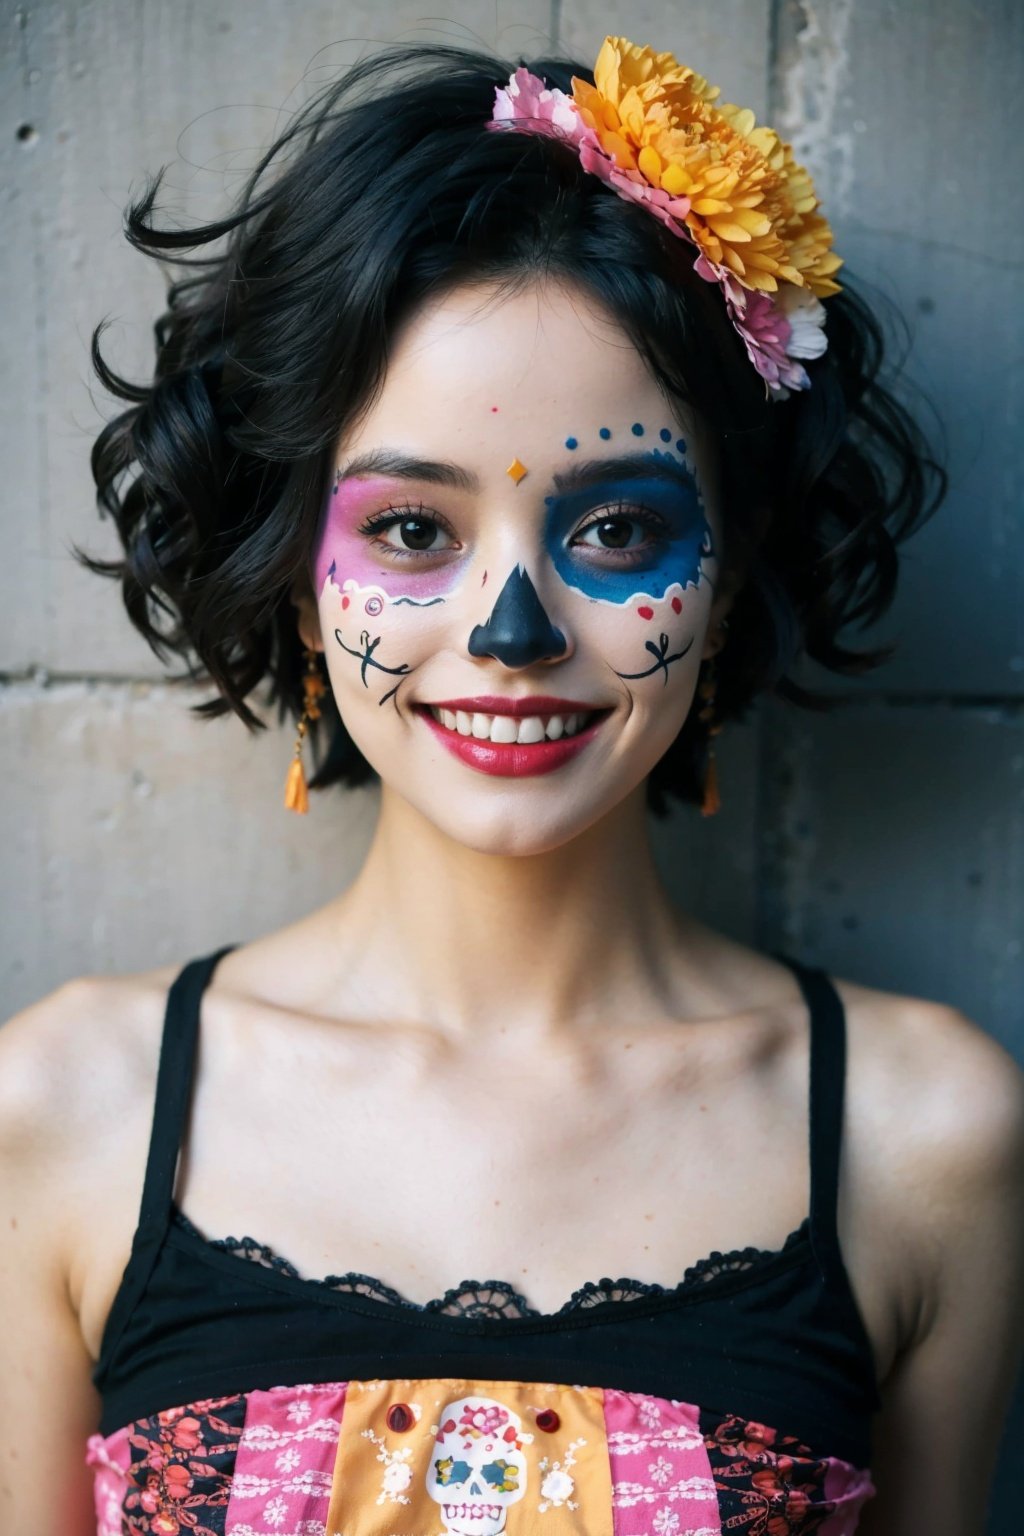 leogirl, 1girl, a dynamic, upper body portrait of a cute young woman with curly short hair, her joyous expression directed towards the viewer. Set against a dark theme, she's adorned with vibrant, Dia de los Muertos-inspired horror makeup, adding a pop of color to the scene. This action-packed pose exudes a lively energy, illuminating her captivating sexy.